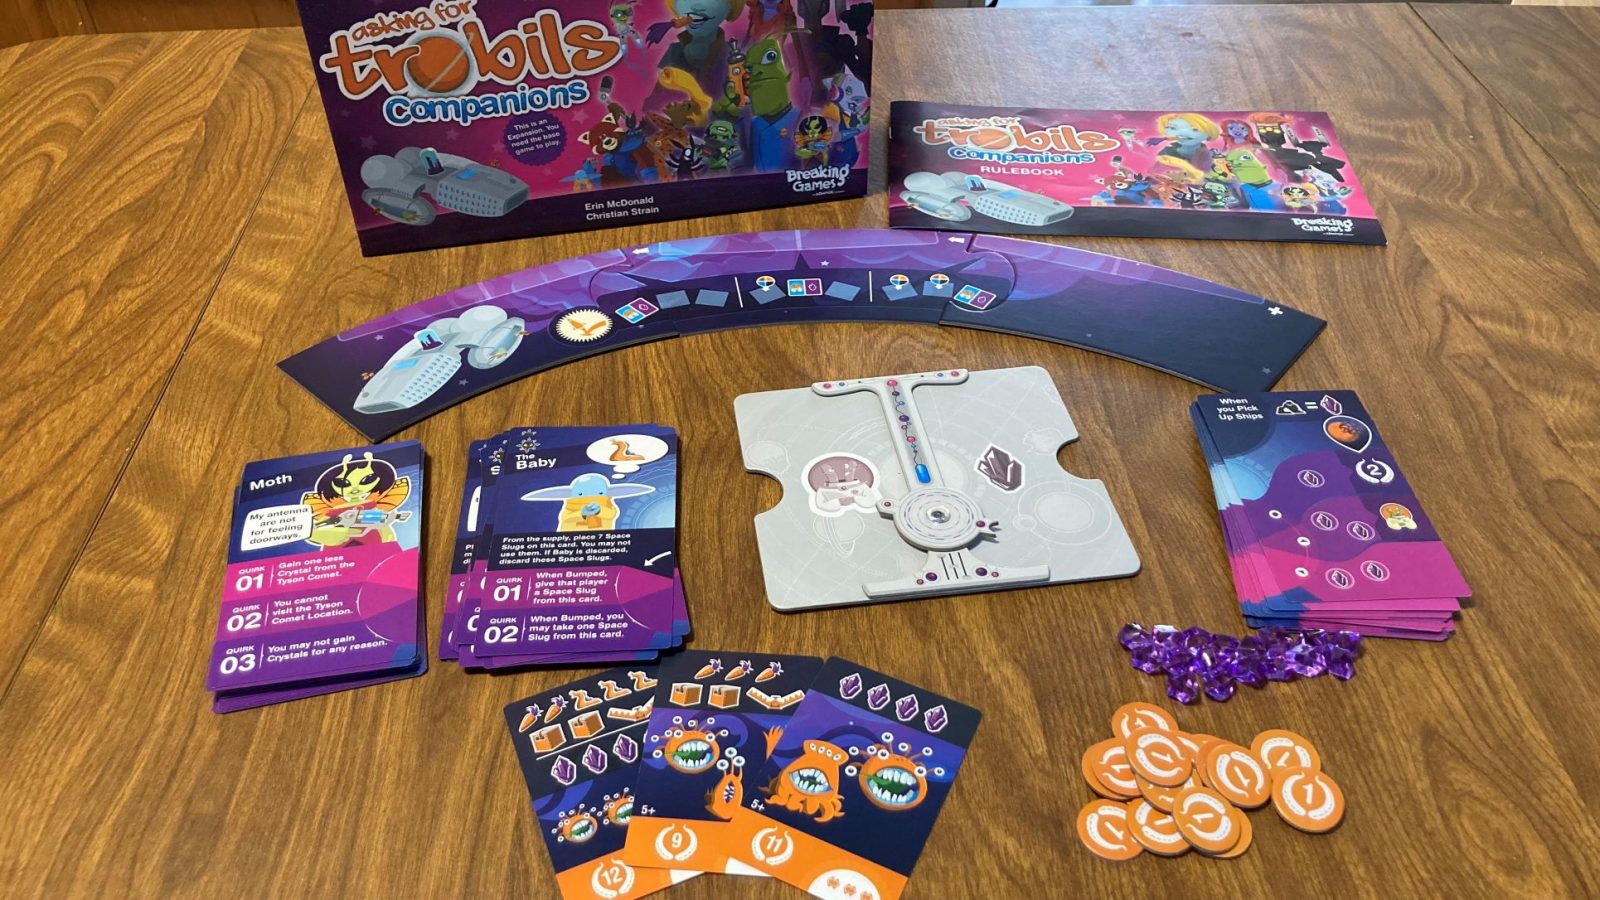 Components from Asking For Trobils: Companions expansion including box top and instruction booklet